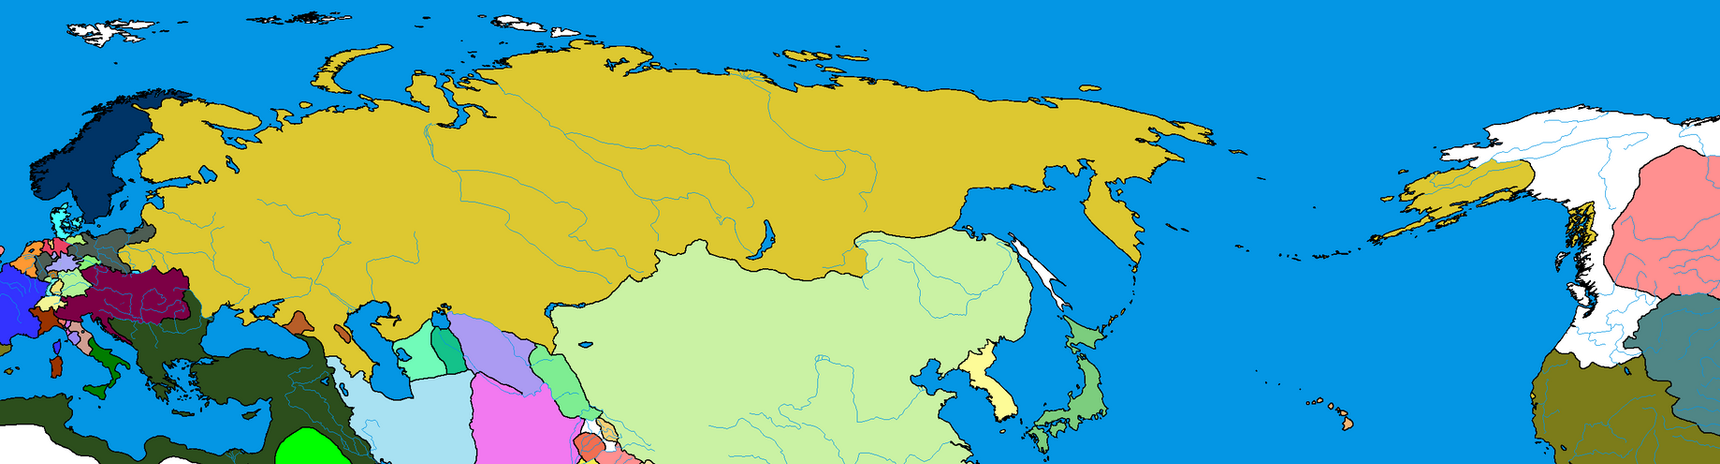 Russian Empire After The 120